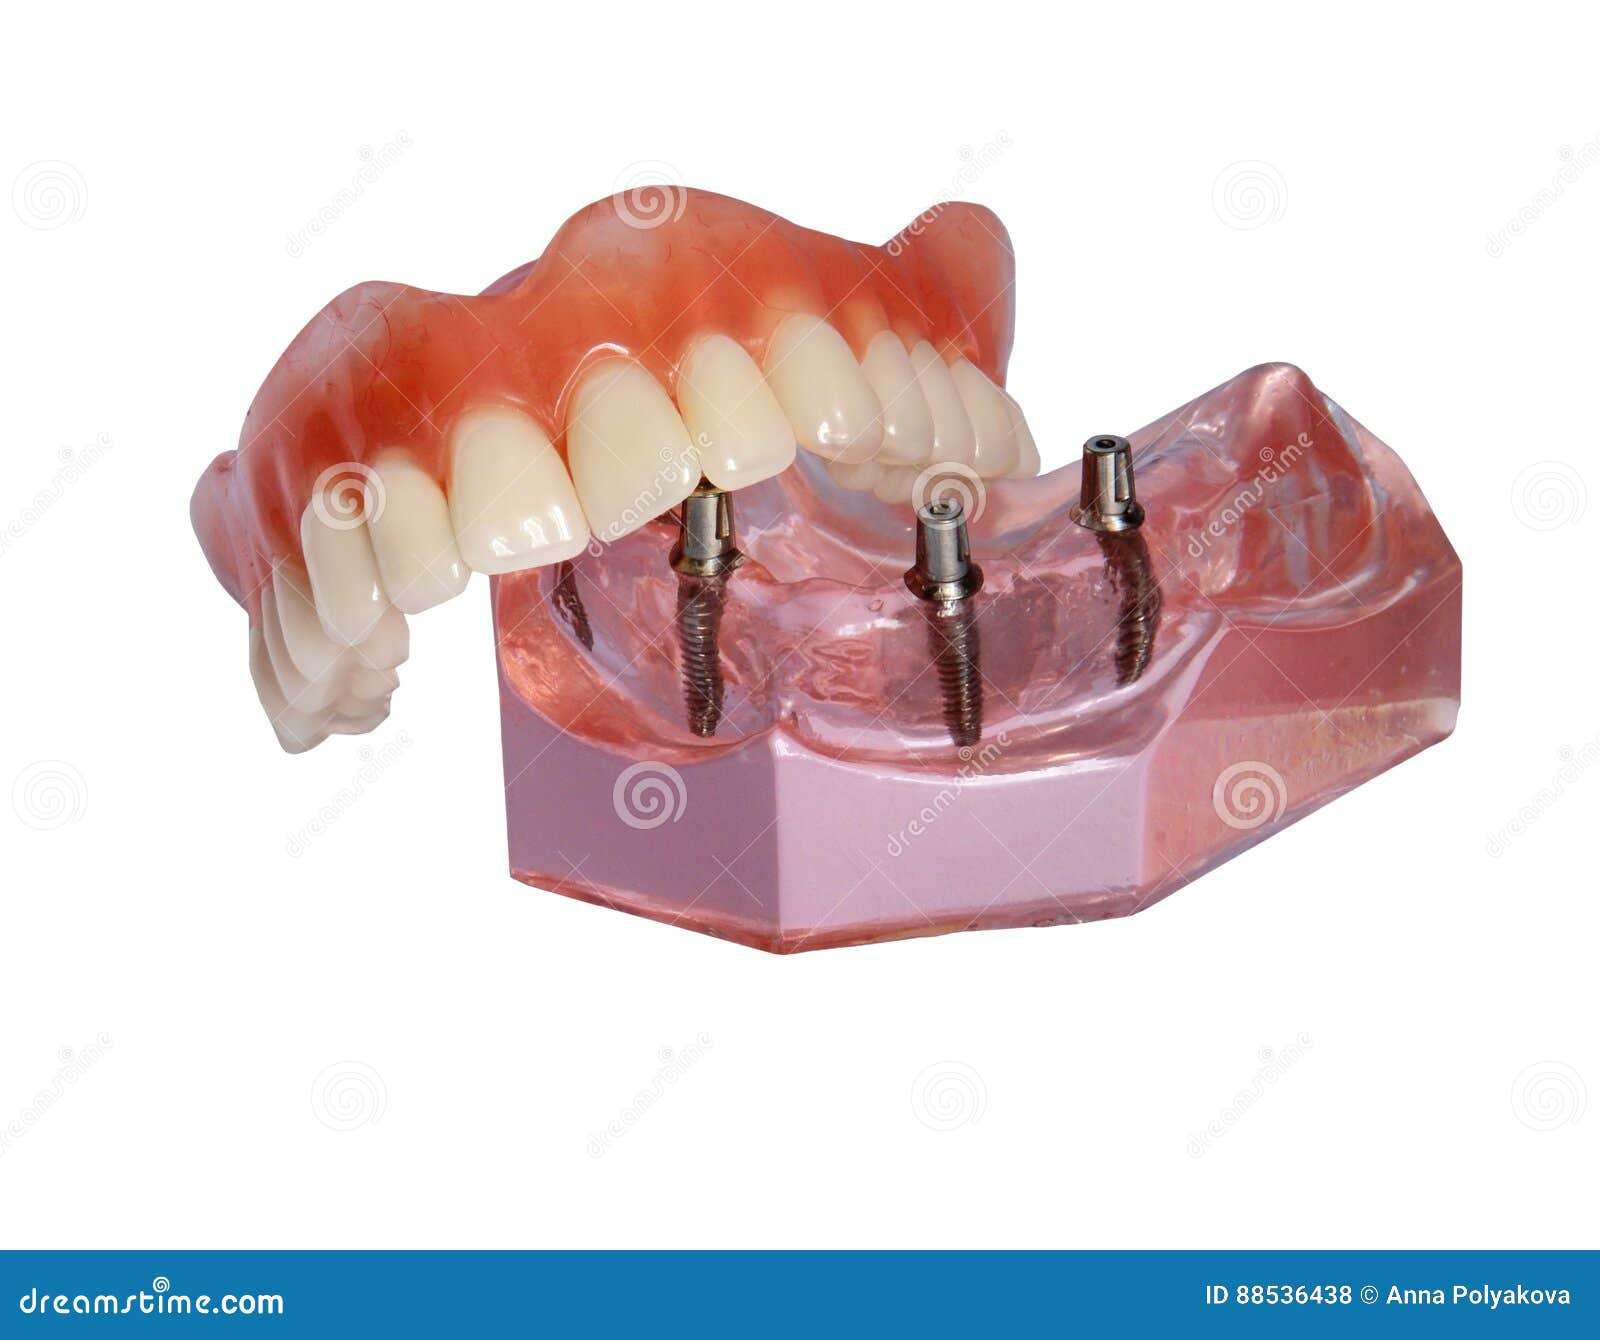 model of a jaw and denture 2